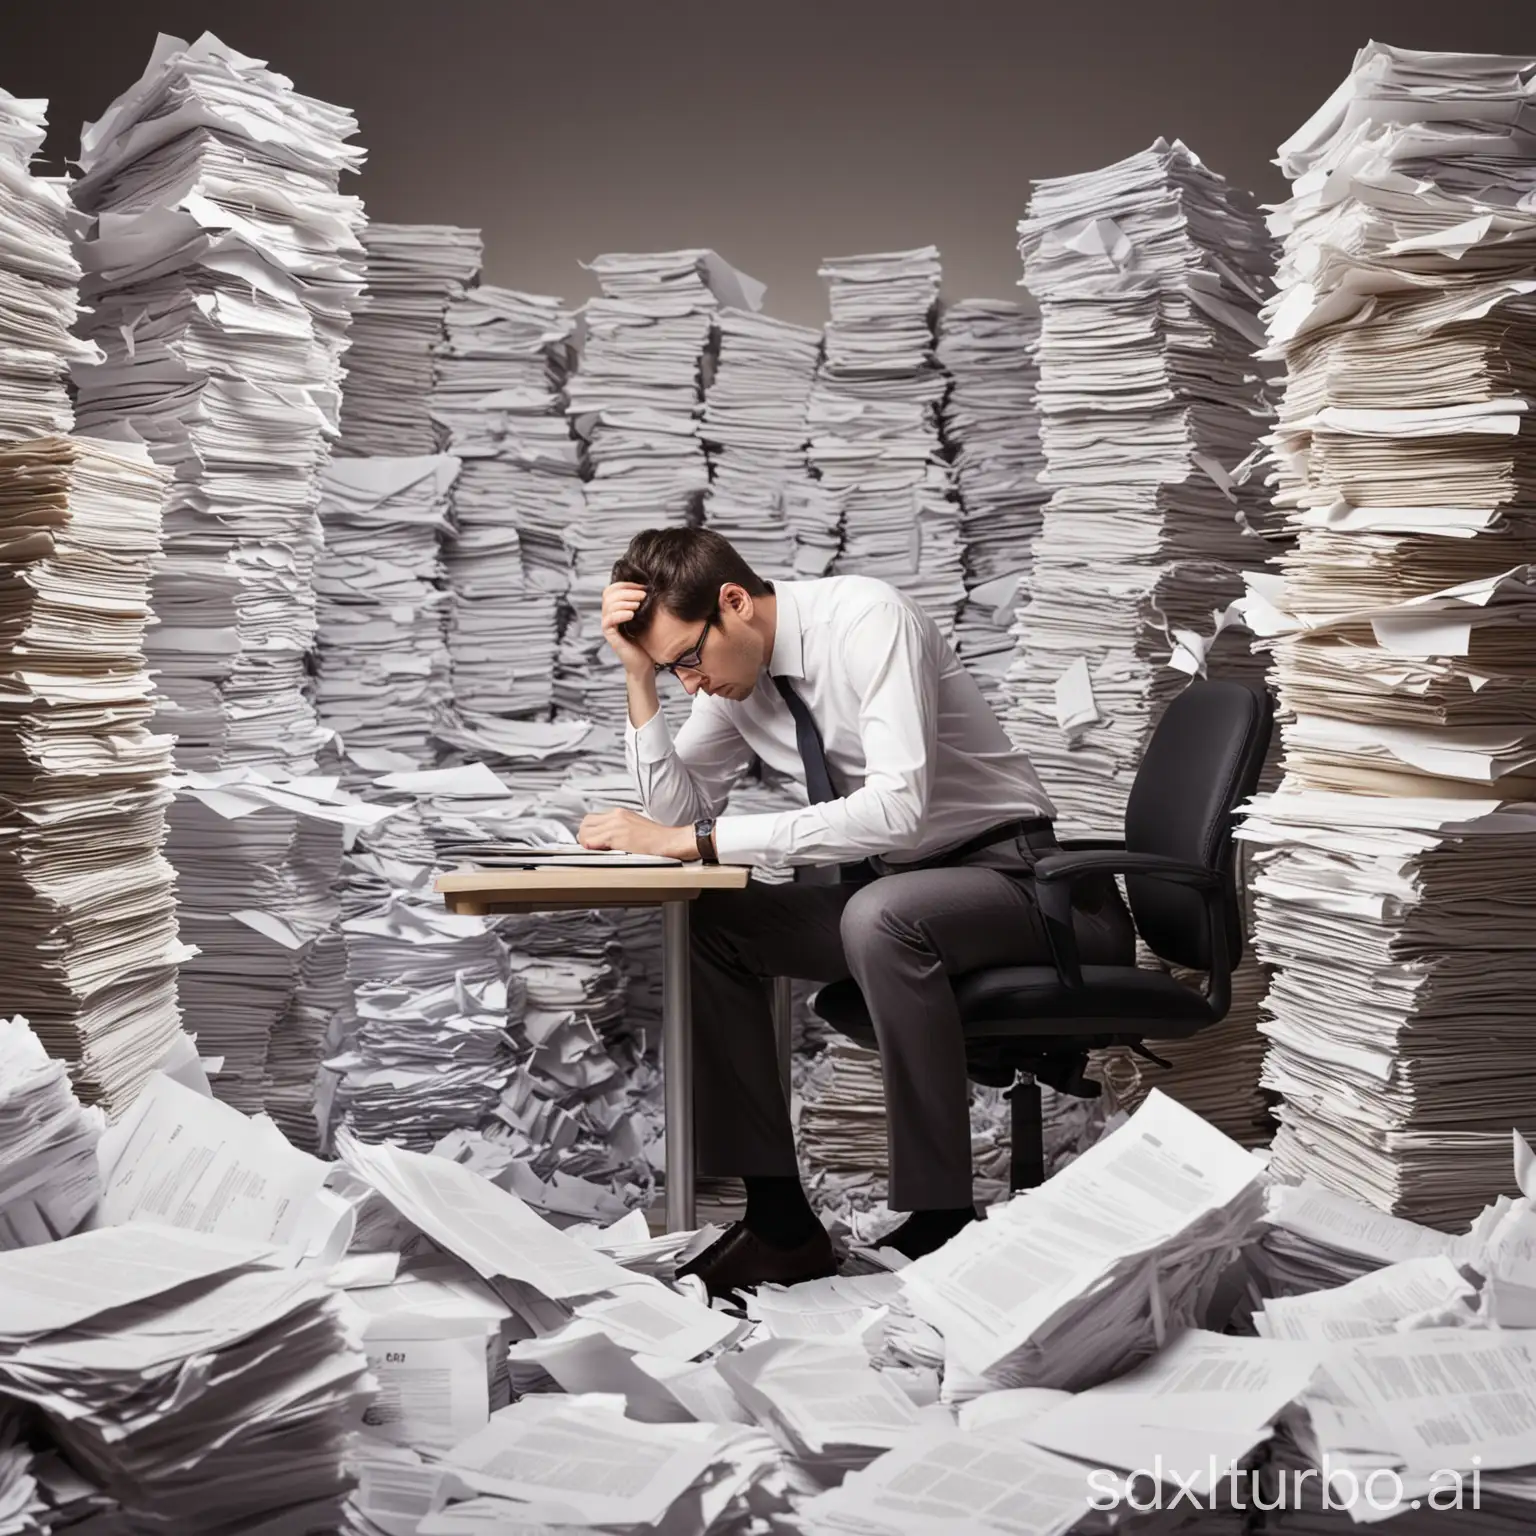 A person sitting at a desk in an office, desperately trying to bring order to the chaos in front of a large pile of documents and paper stacks.